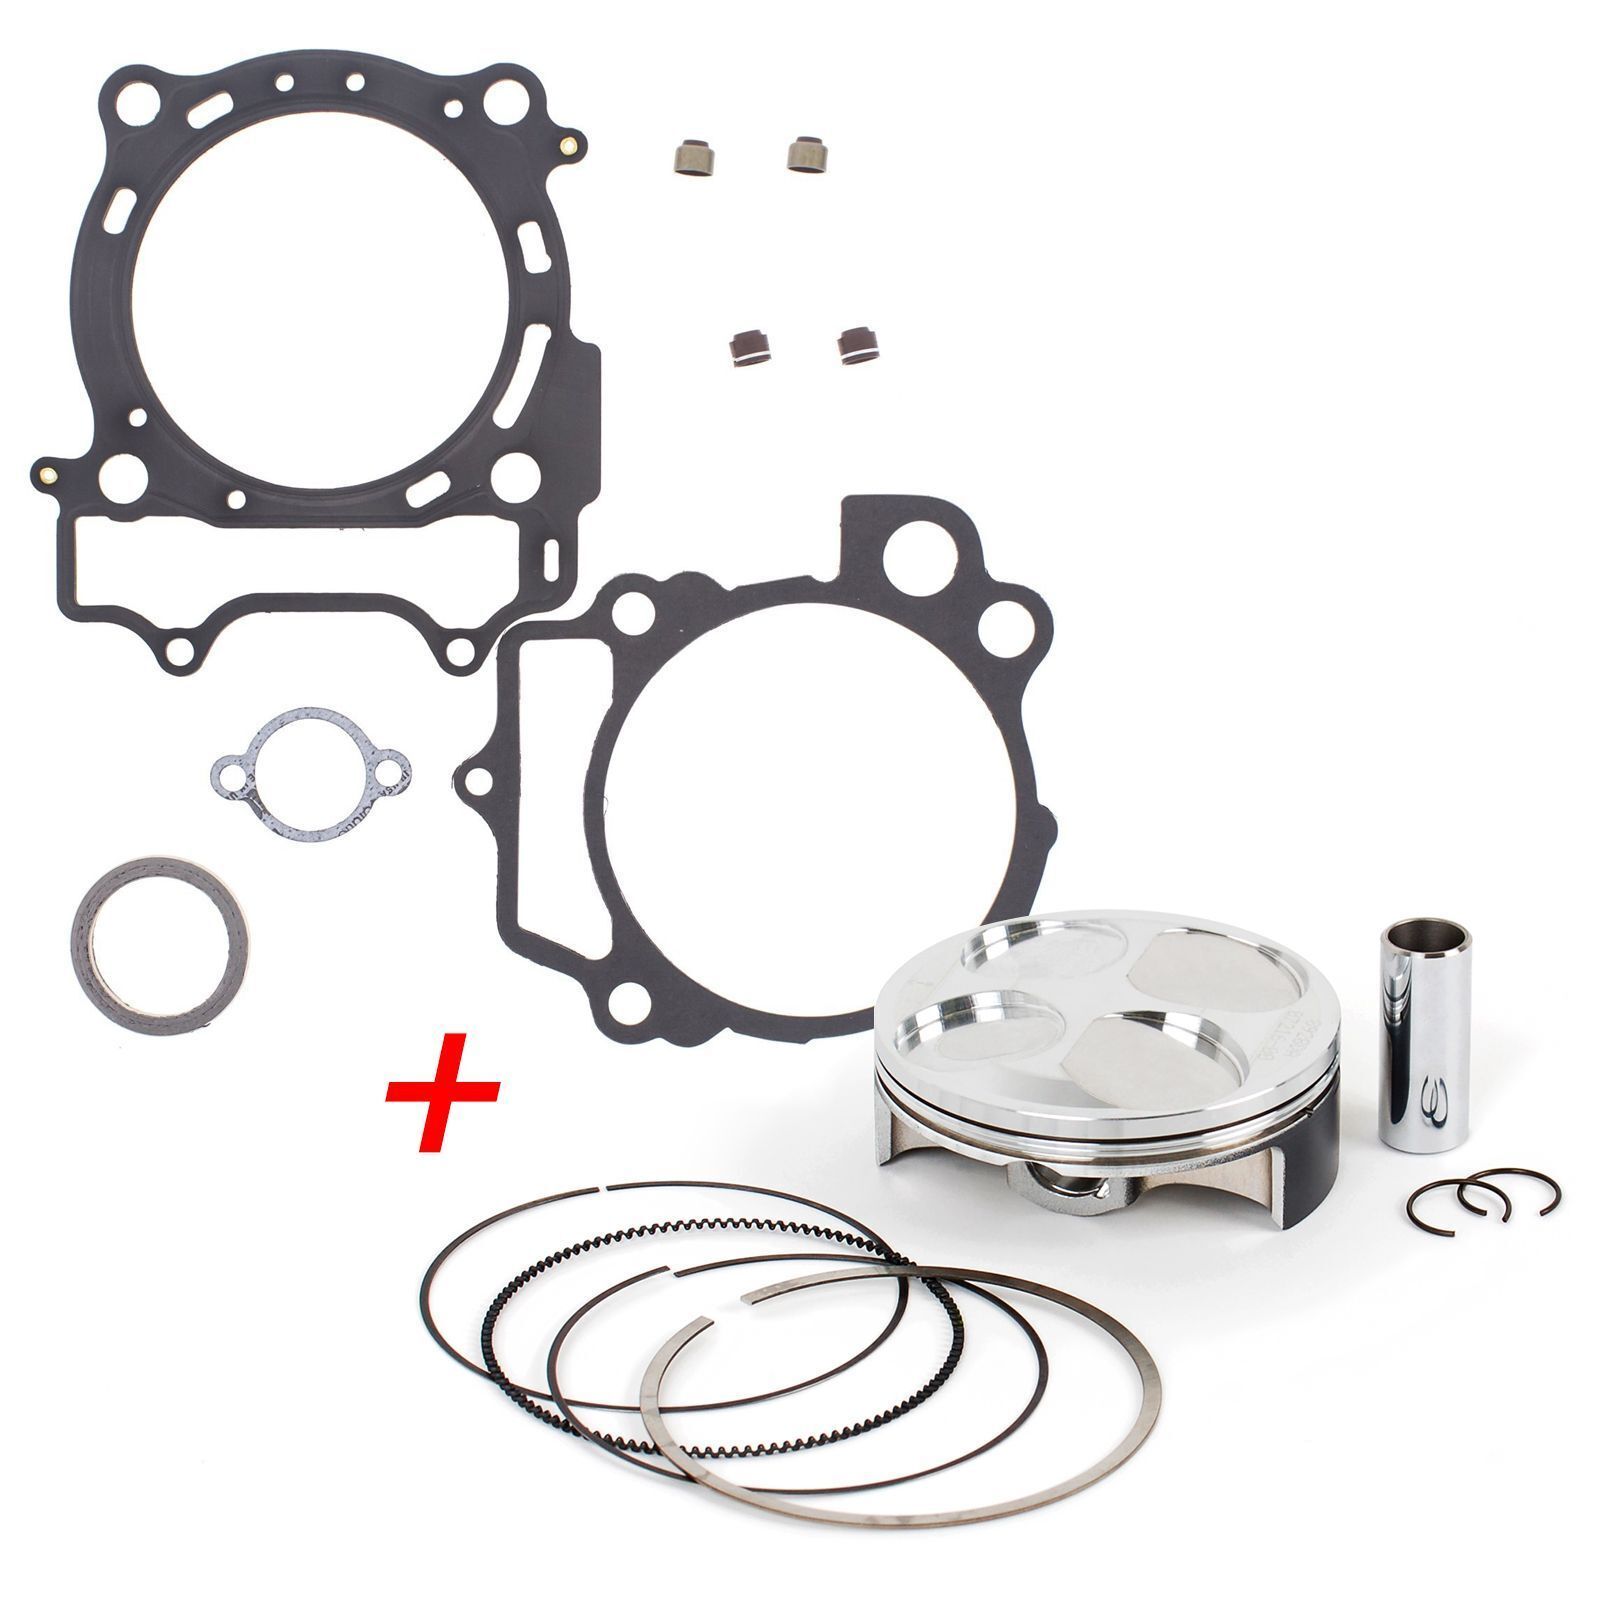 Top End Rebuild Kit (A) Yamaha WR426F 01-02 Wossner